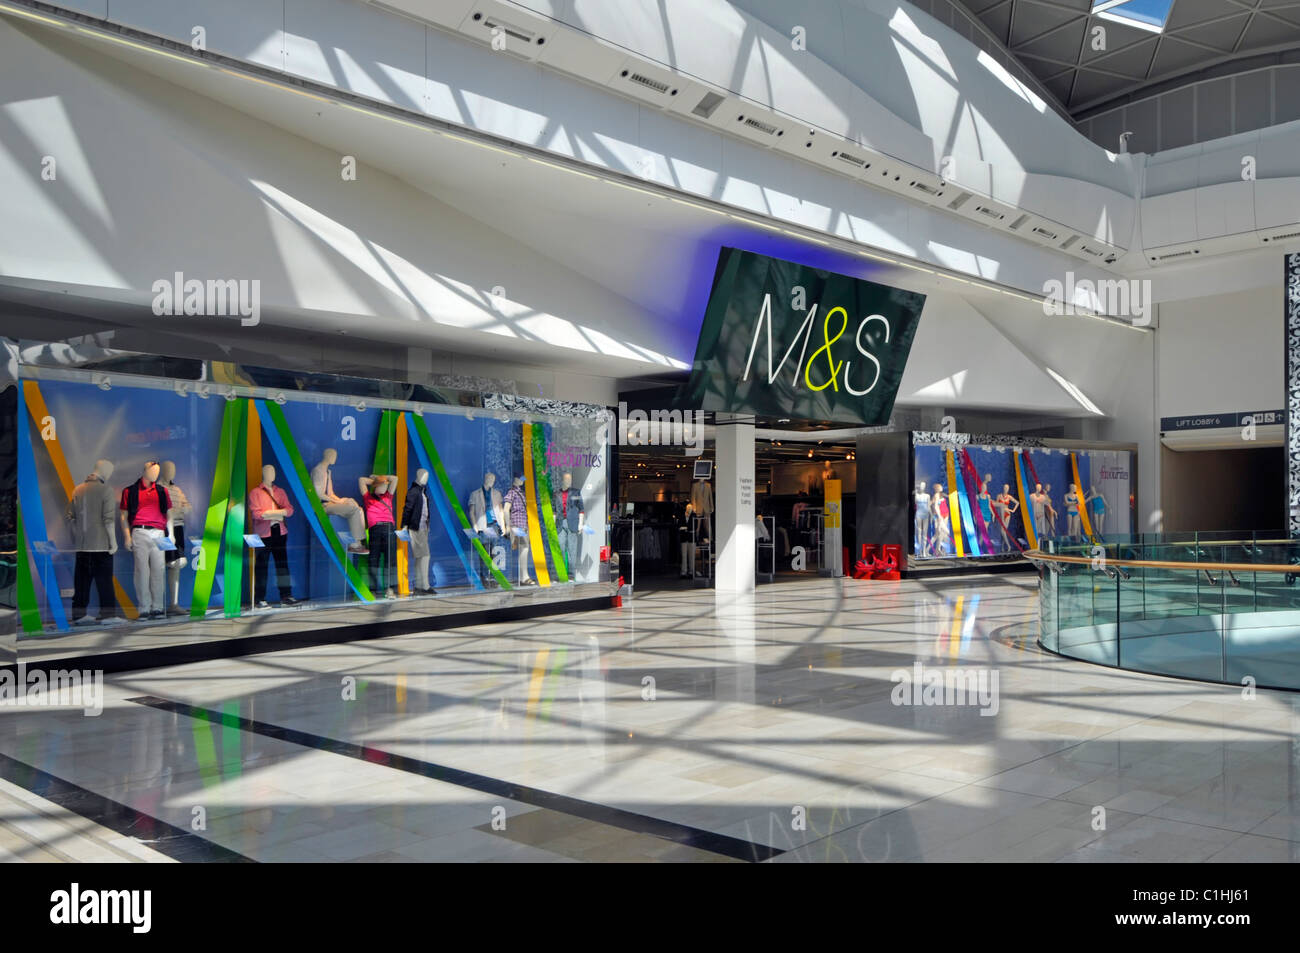 Marks and Spencer retail store window displays & M&S sign above entrance inside Westfield shopping centre Shepherds Bush White City London England UK Stock Photo